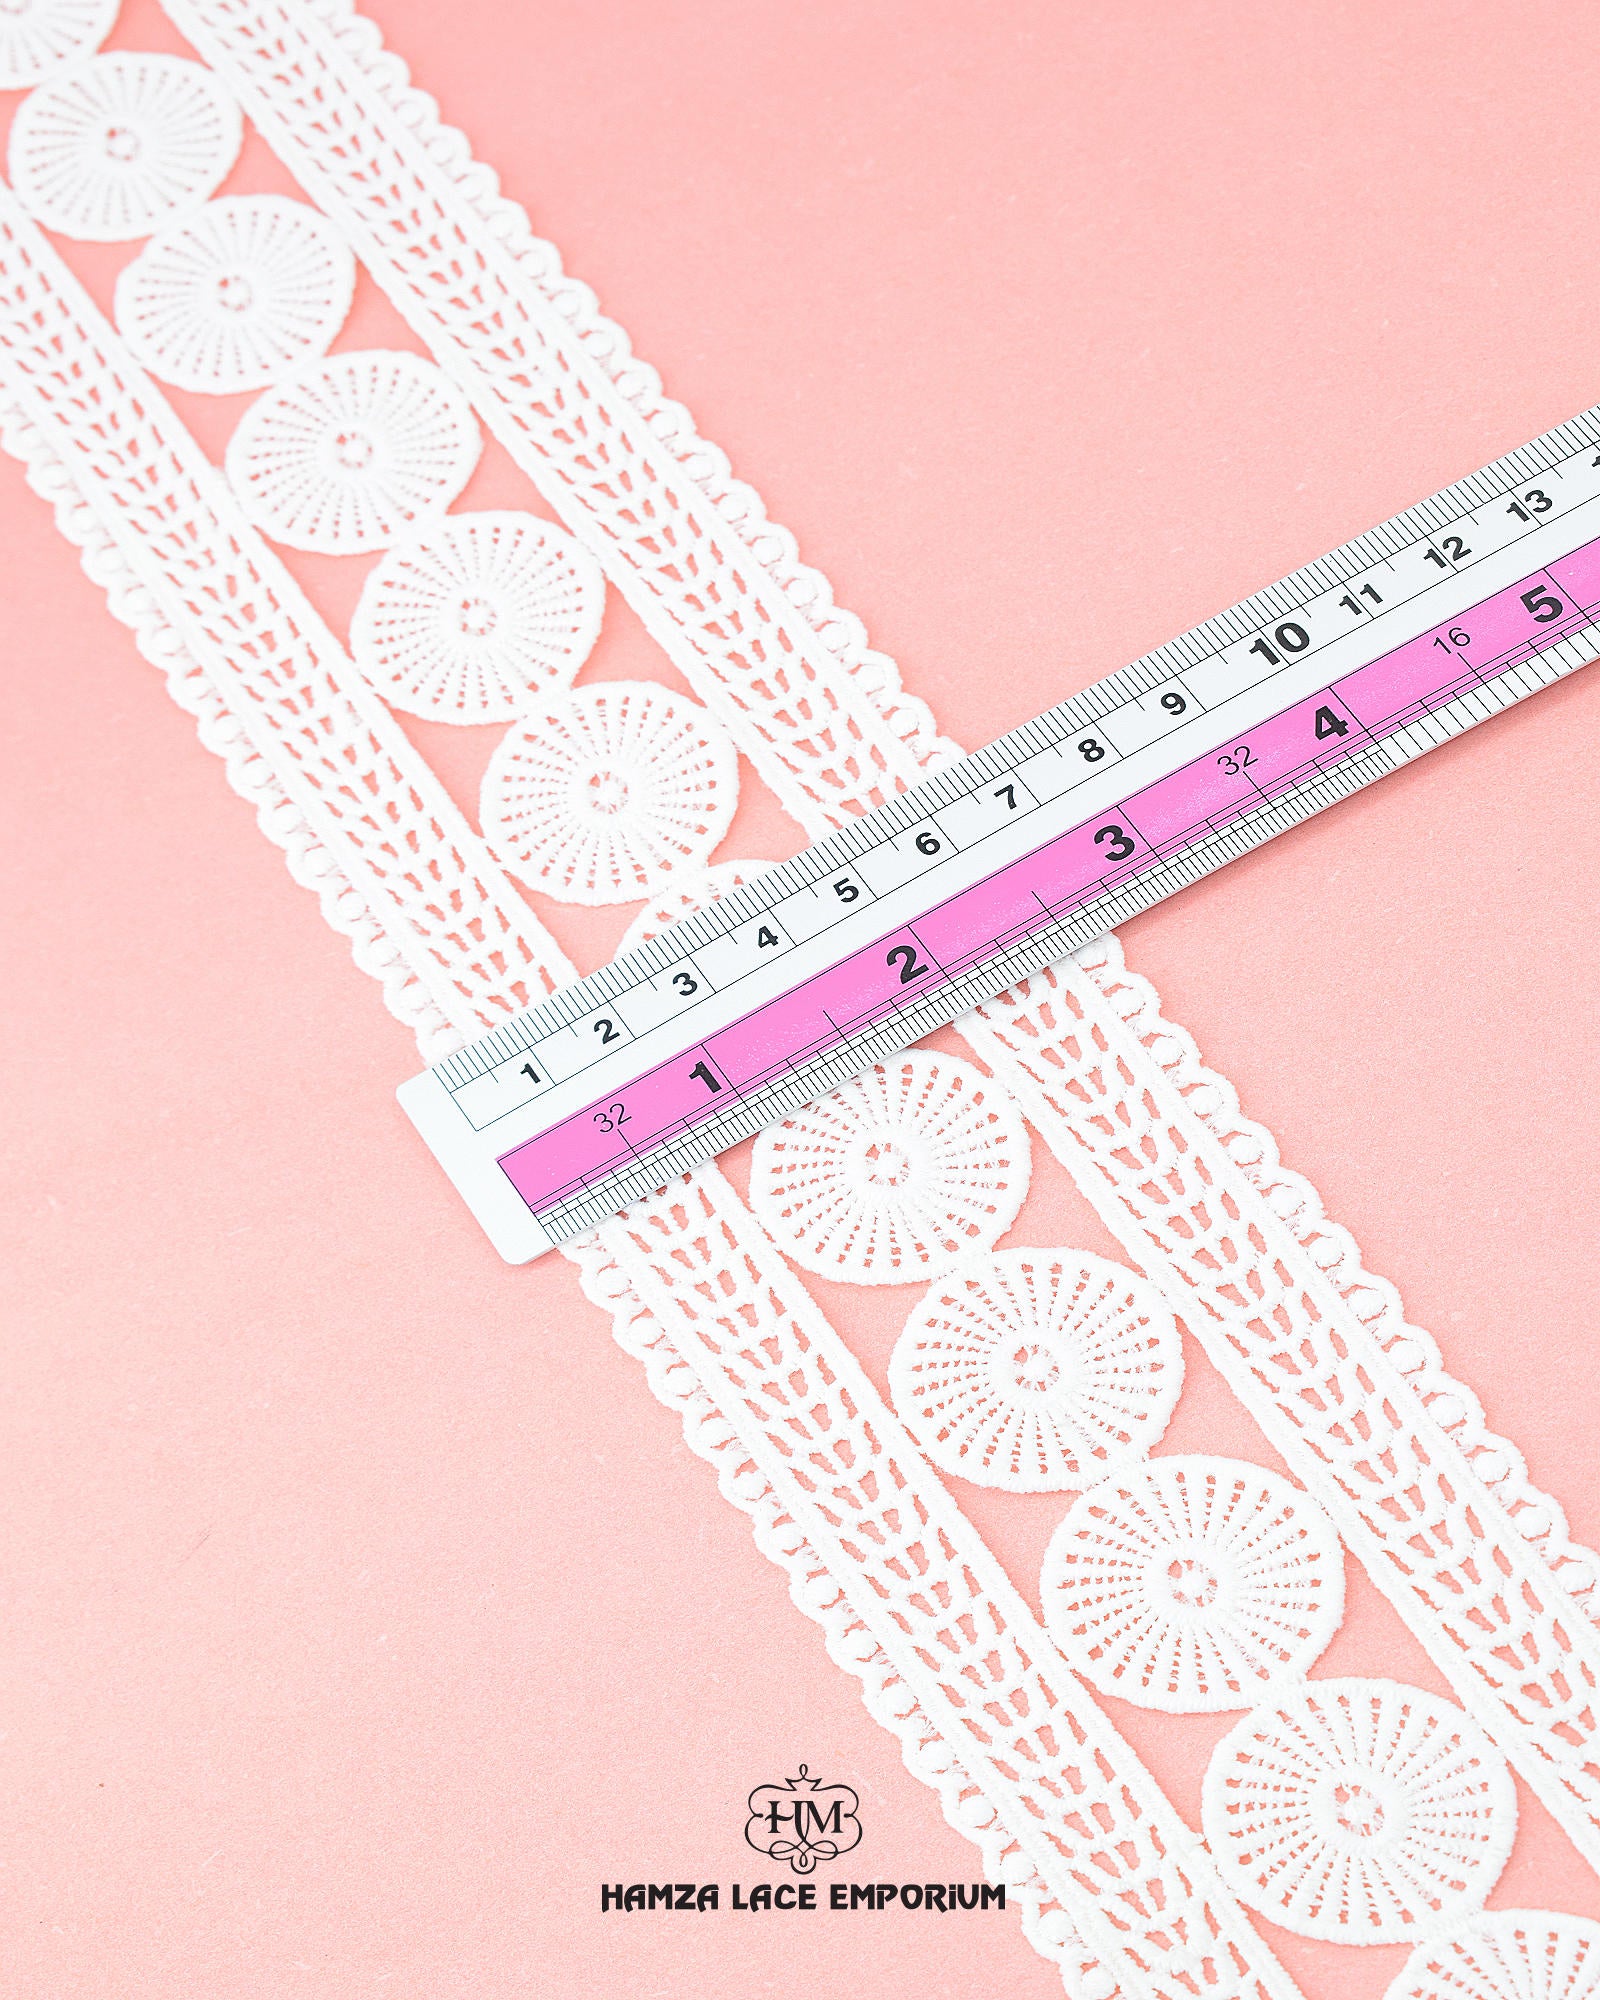 Center Filling Lace 23565 showcased alongside a ruler, revealing a width of 2.25 inches.